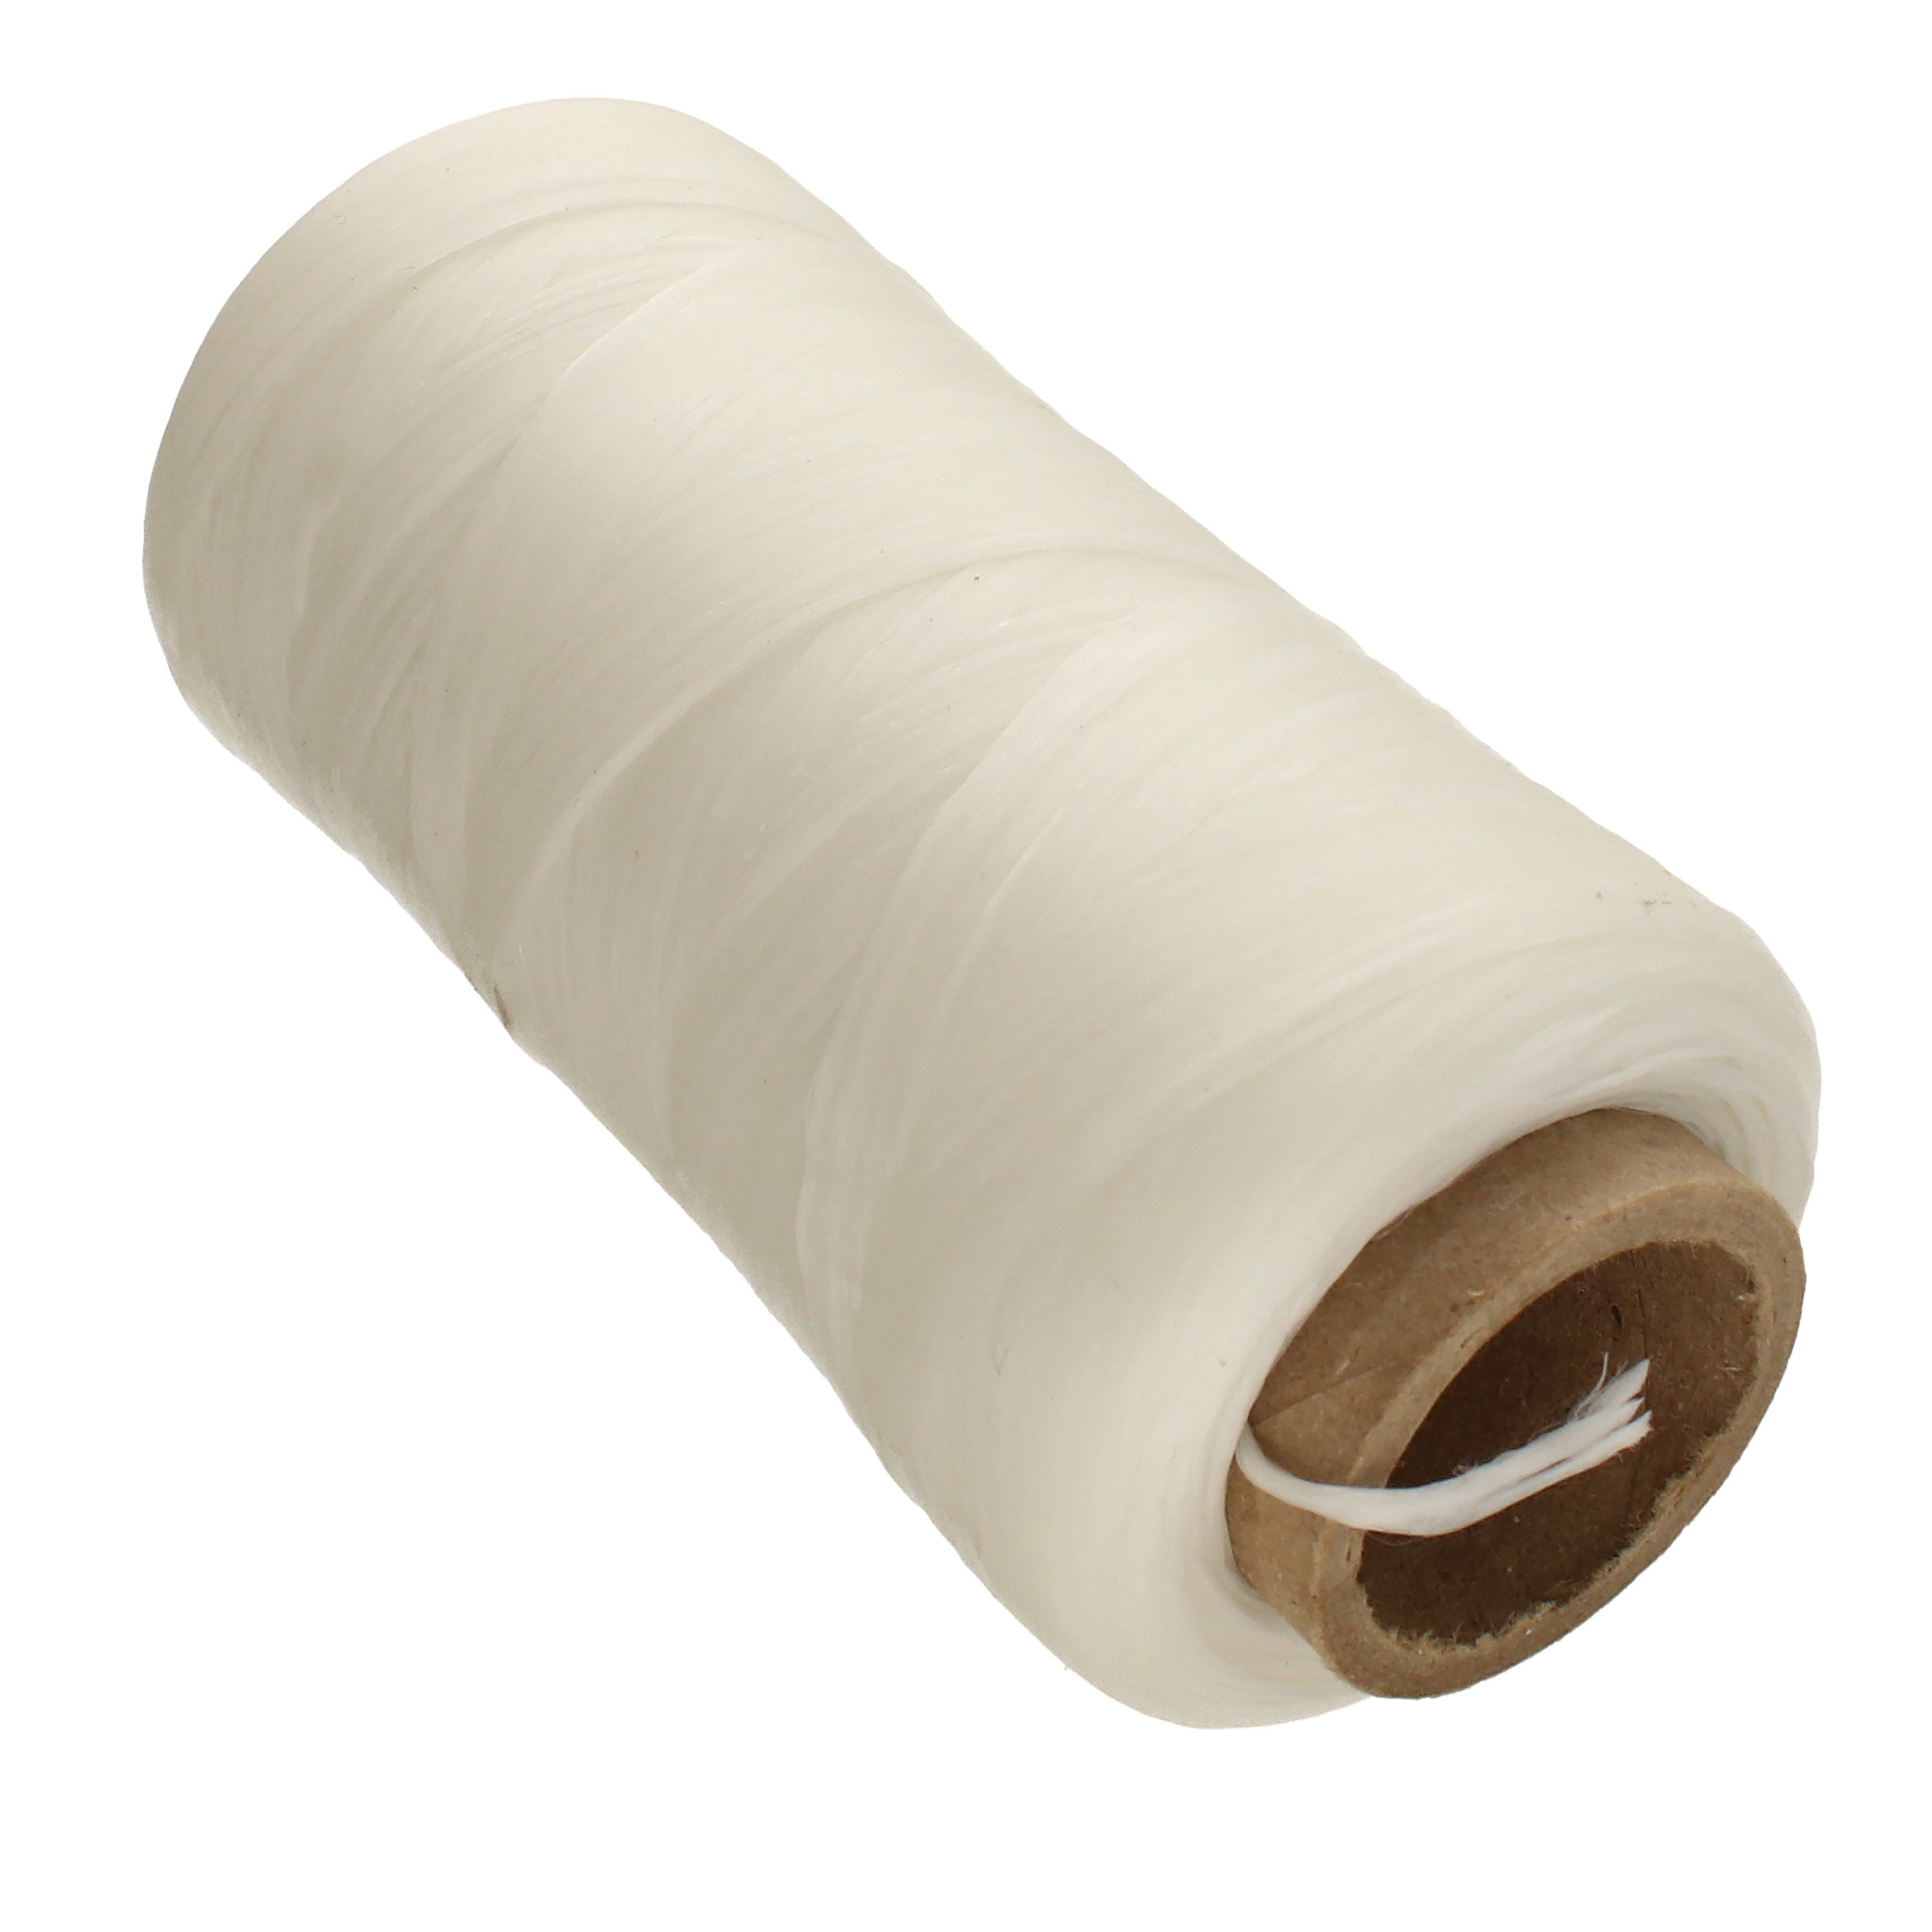 1 Roll Natural Sinew Waxed Beading Poly Thread Spool Artificial